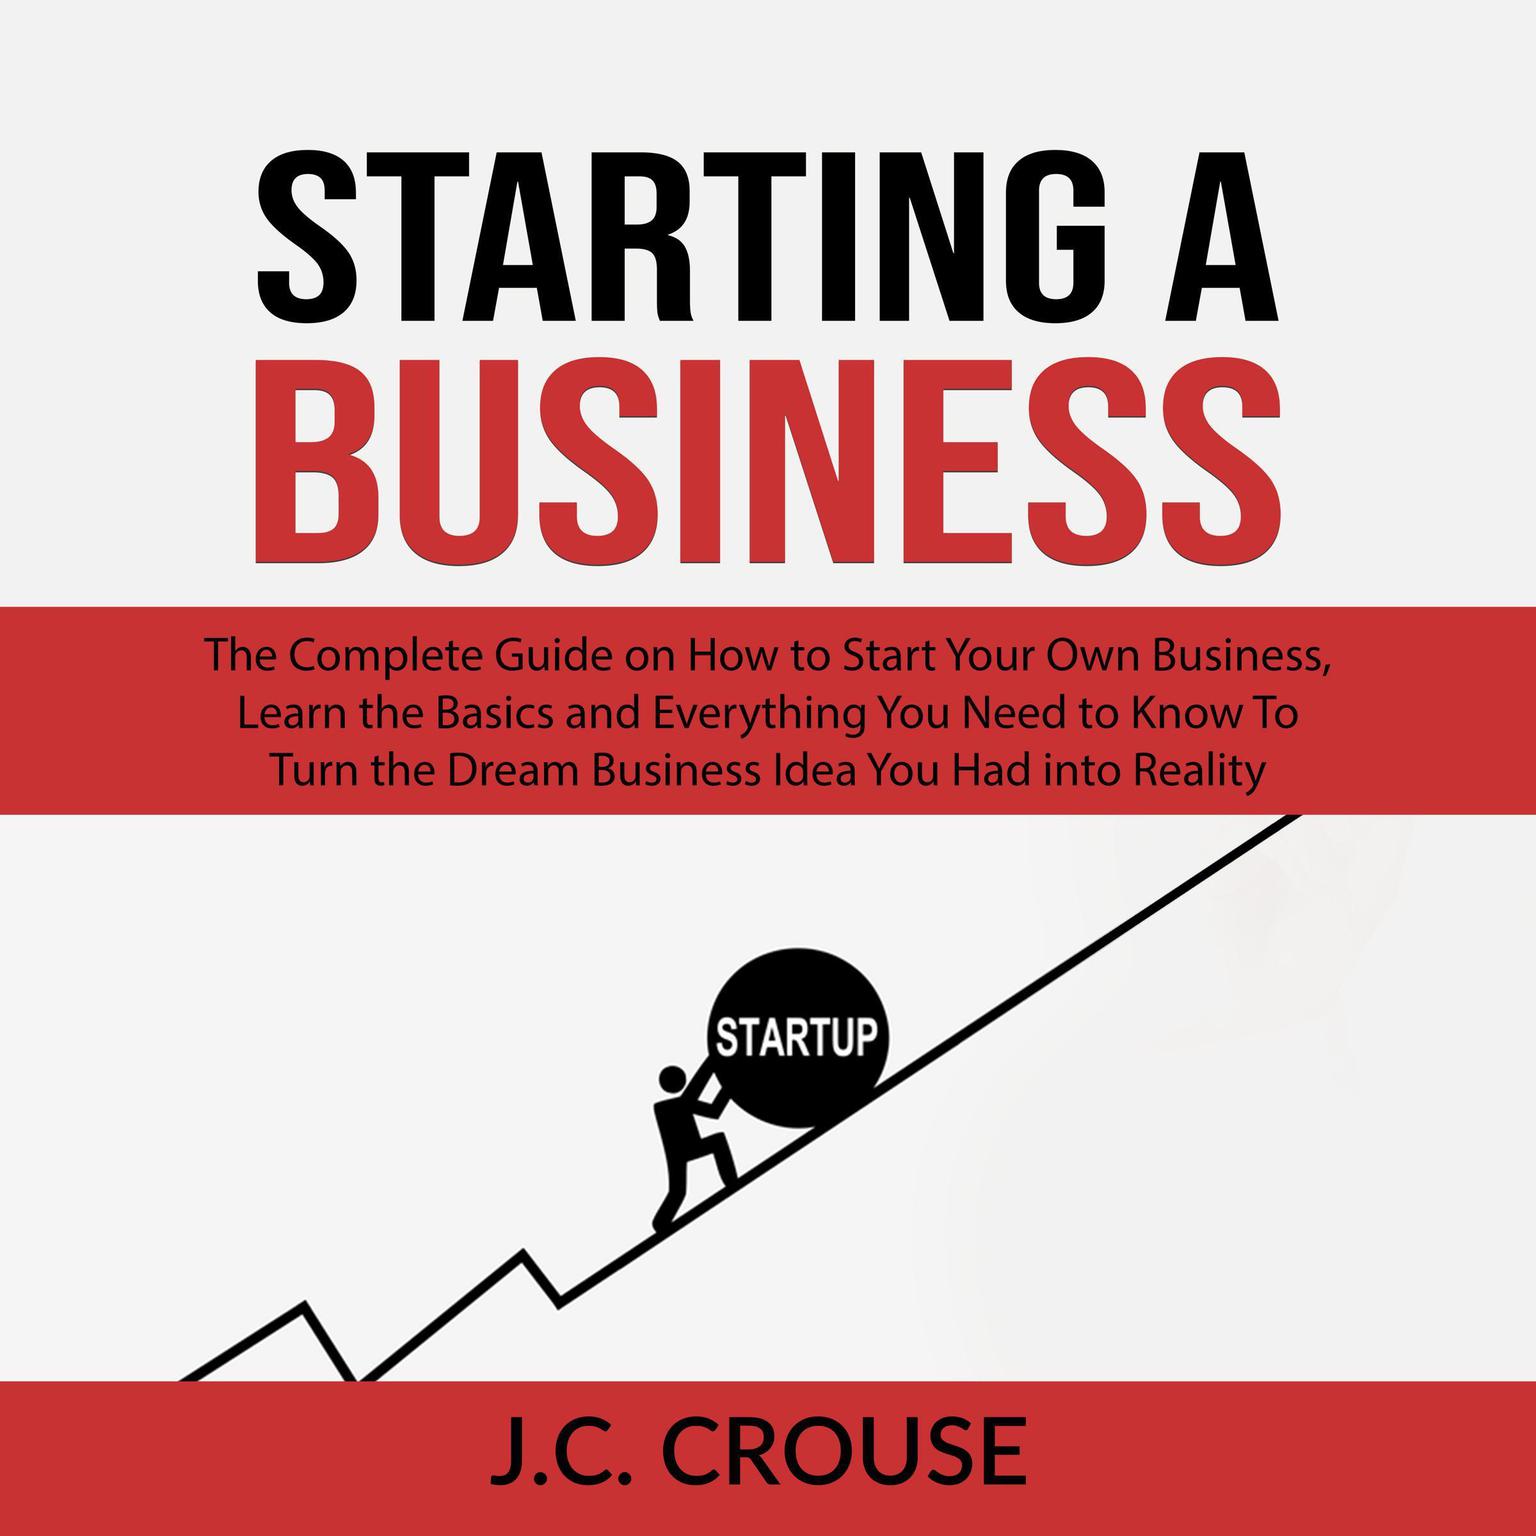 Starting a Business: The Complete Guide on How to Start Your Own Business, Learn the Basics and Everything You Need to Know To Turn the Dream Business Idea You Had into Reality Audiobook, by J.C. Crouse